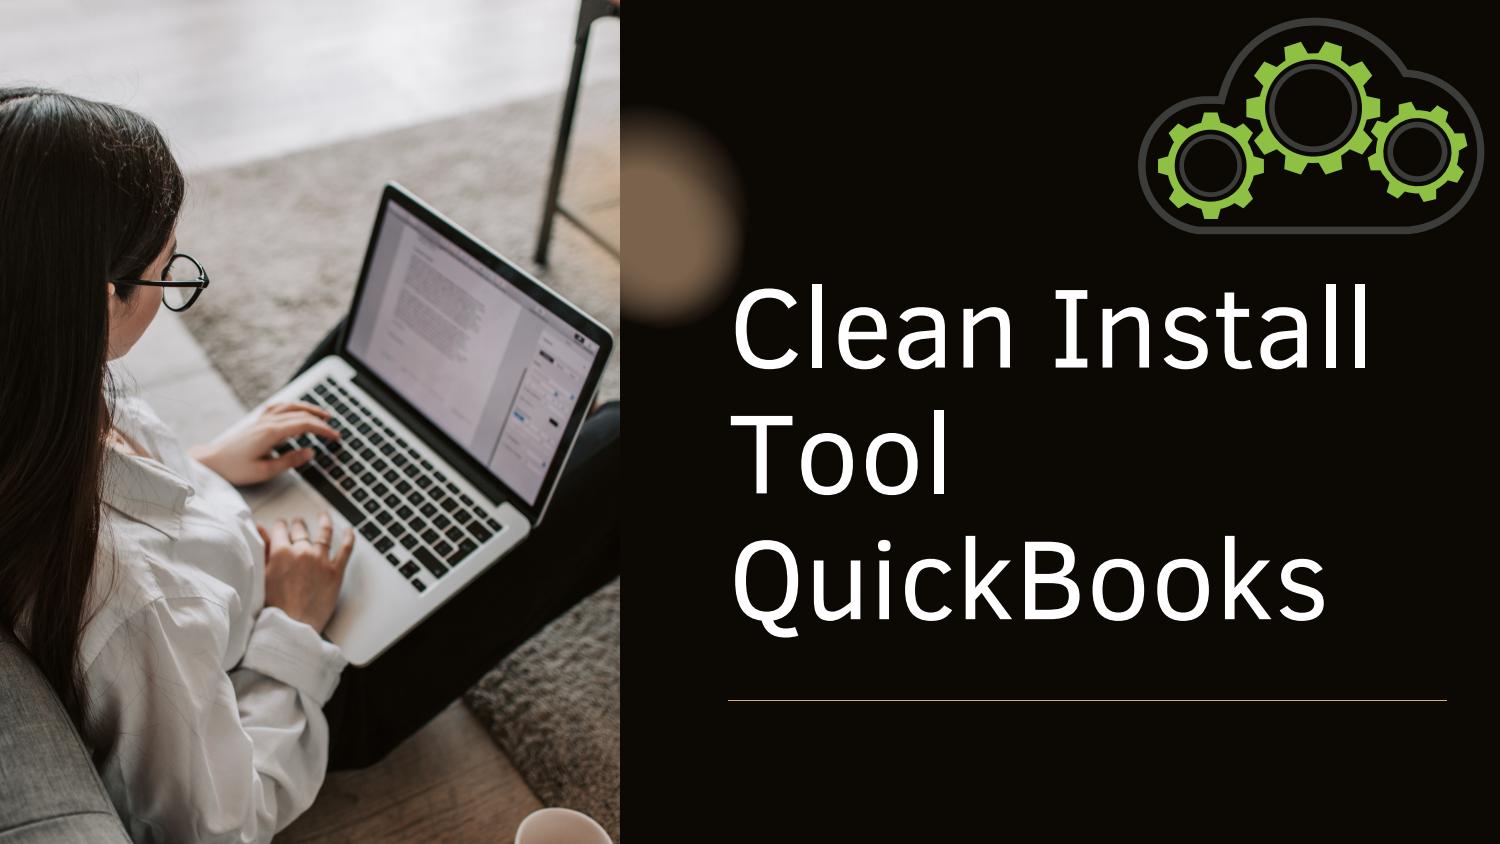 quickbooks clean install tool: Featured image